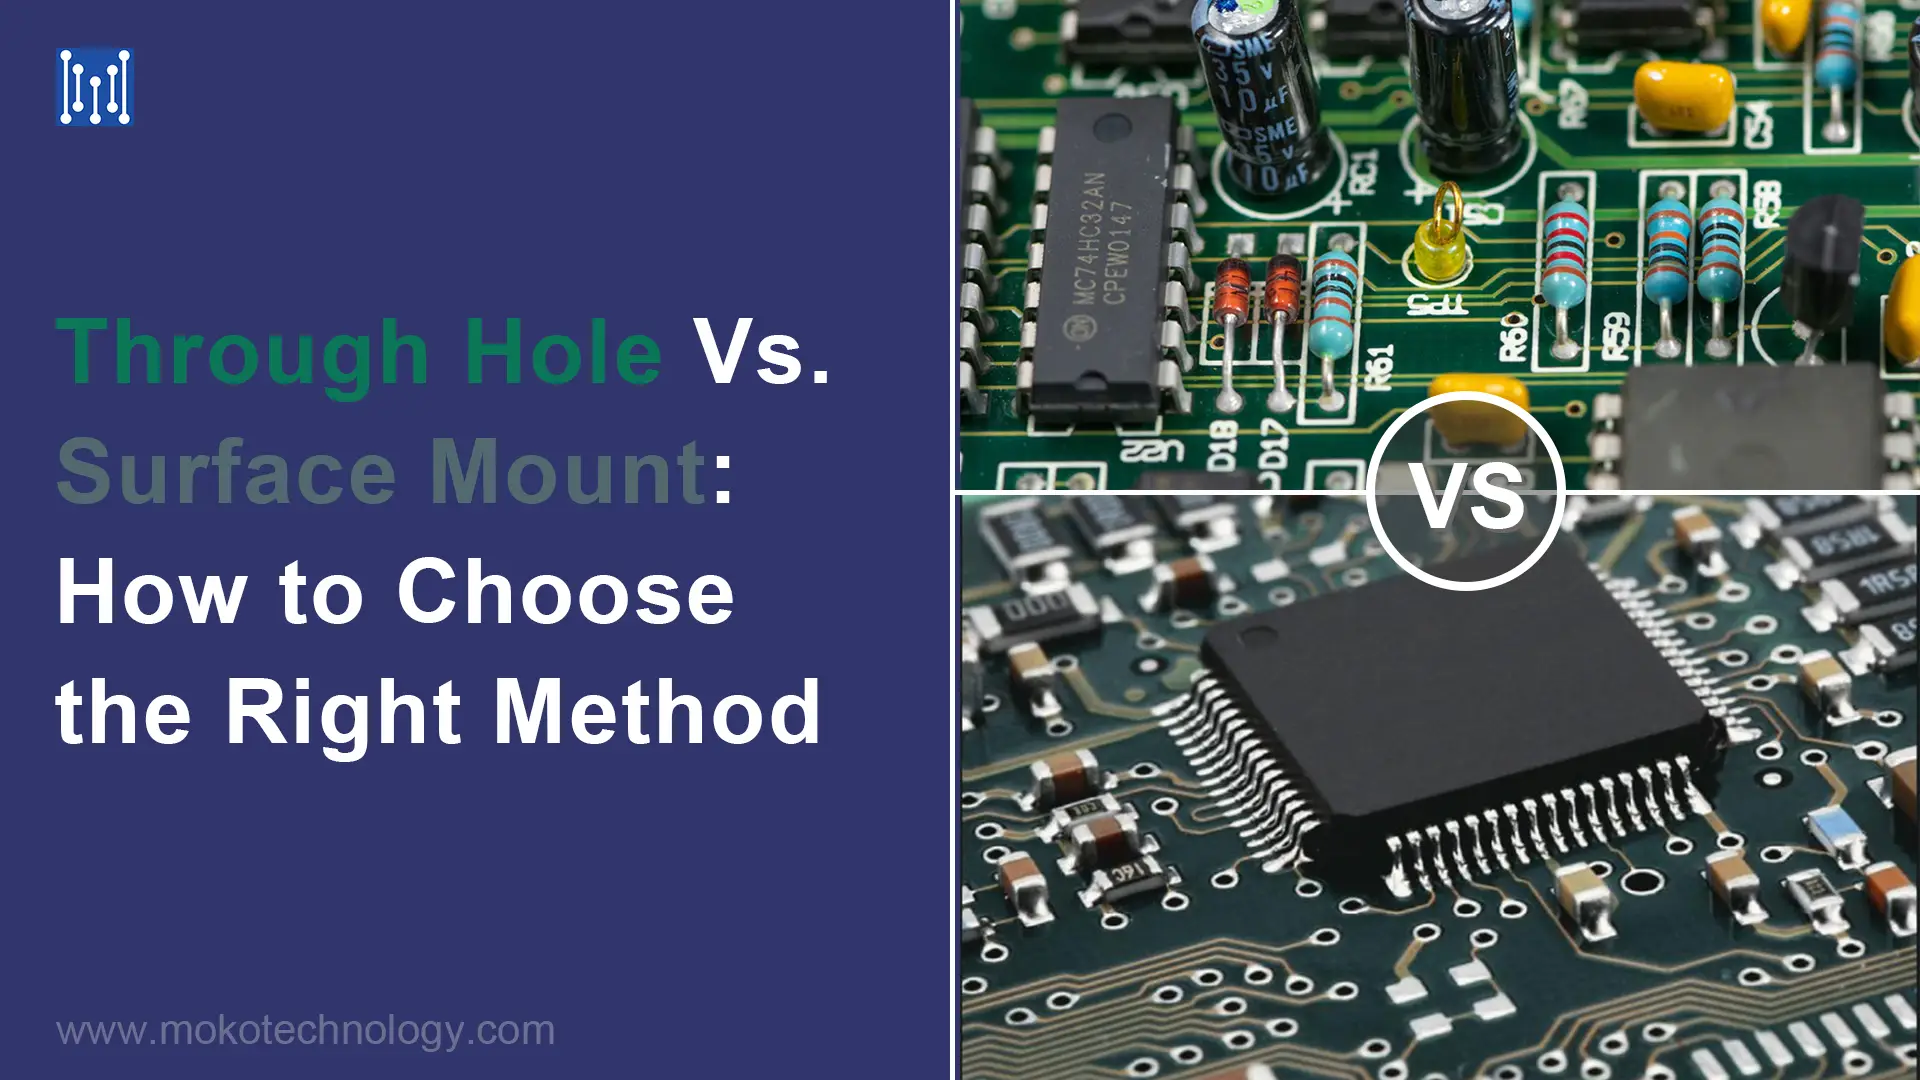 Through Hole Vs. Surface Mount_ How to Choose the Right Method